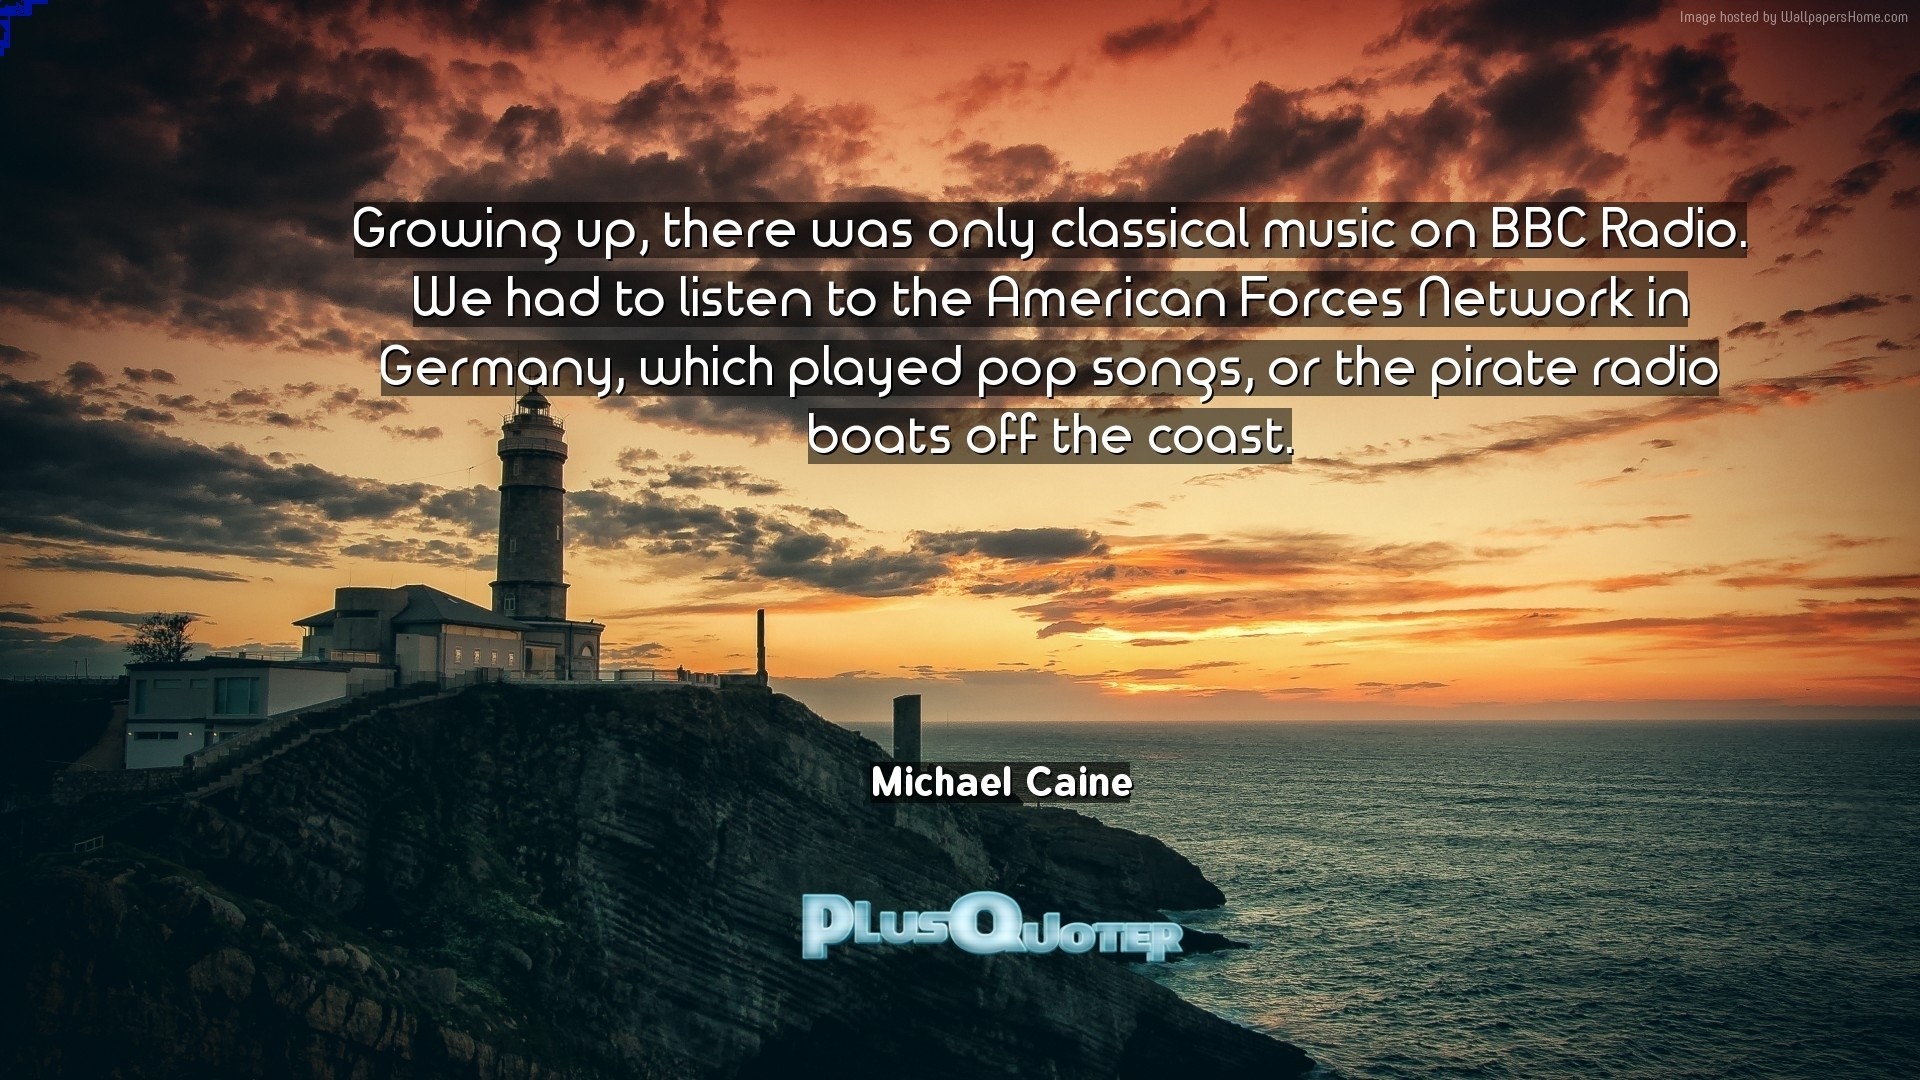 1920x1080 Download Wallpaper with inspirational Quotes- "Growing up, there was only classical  music on